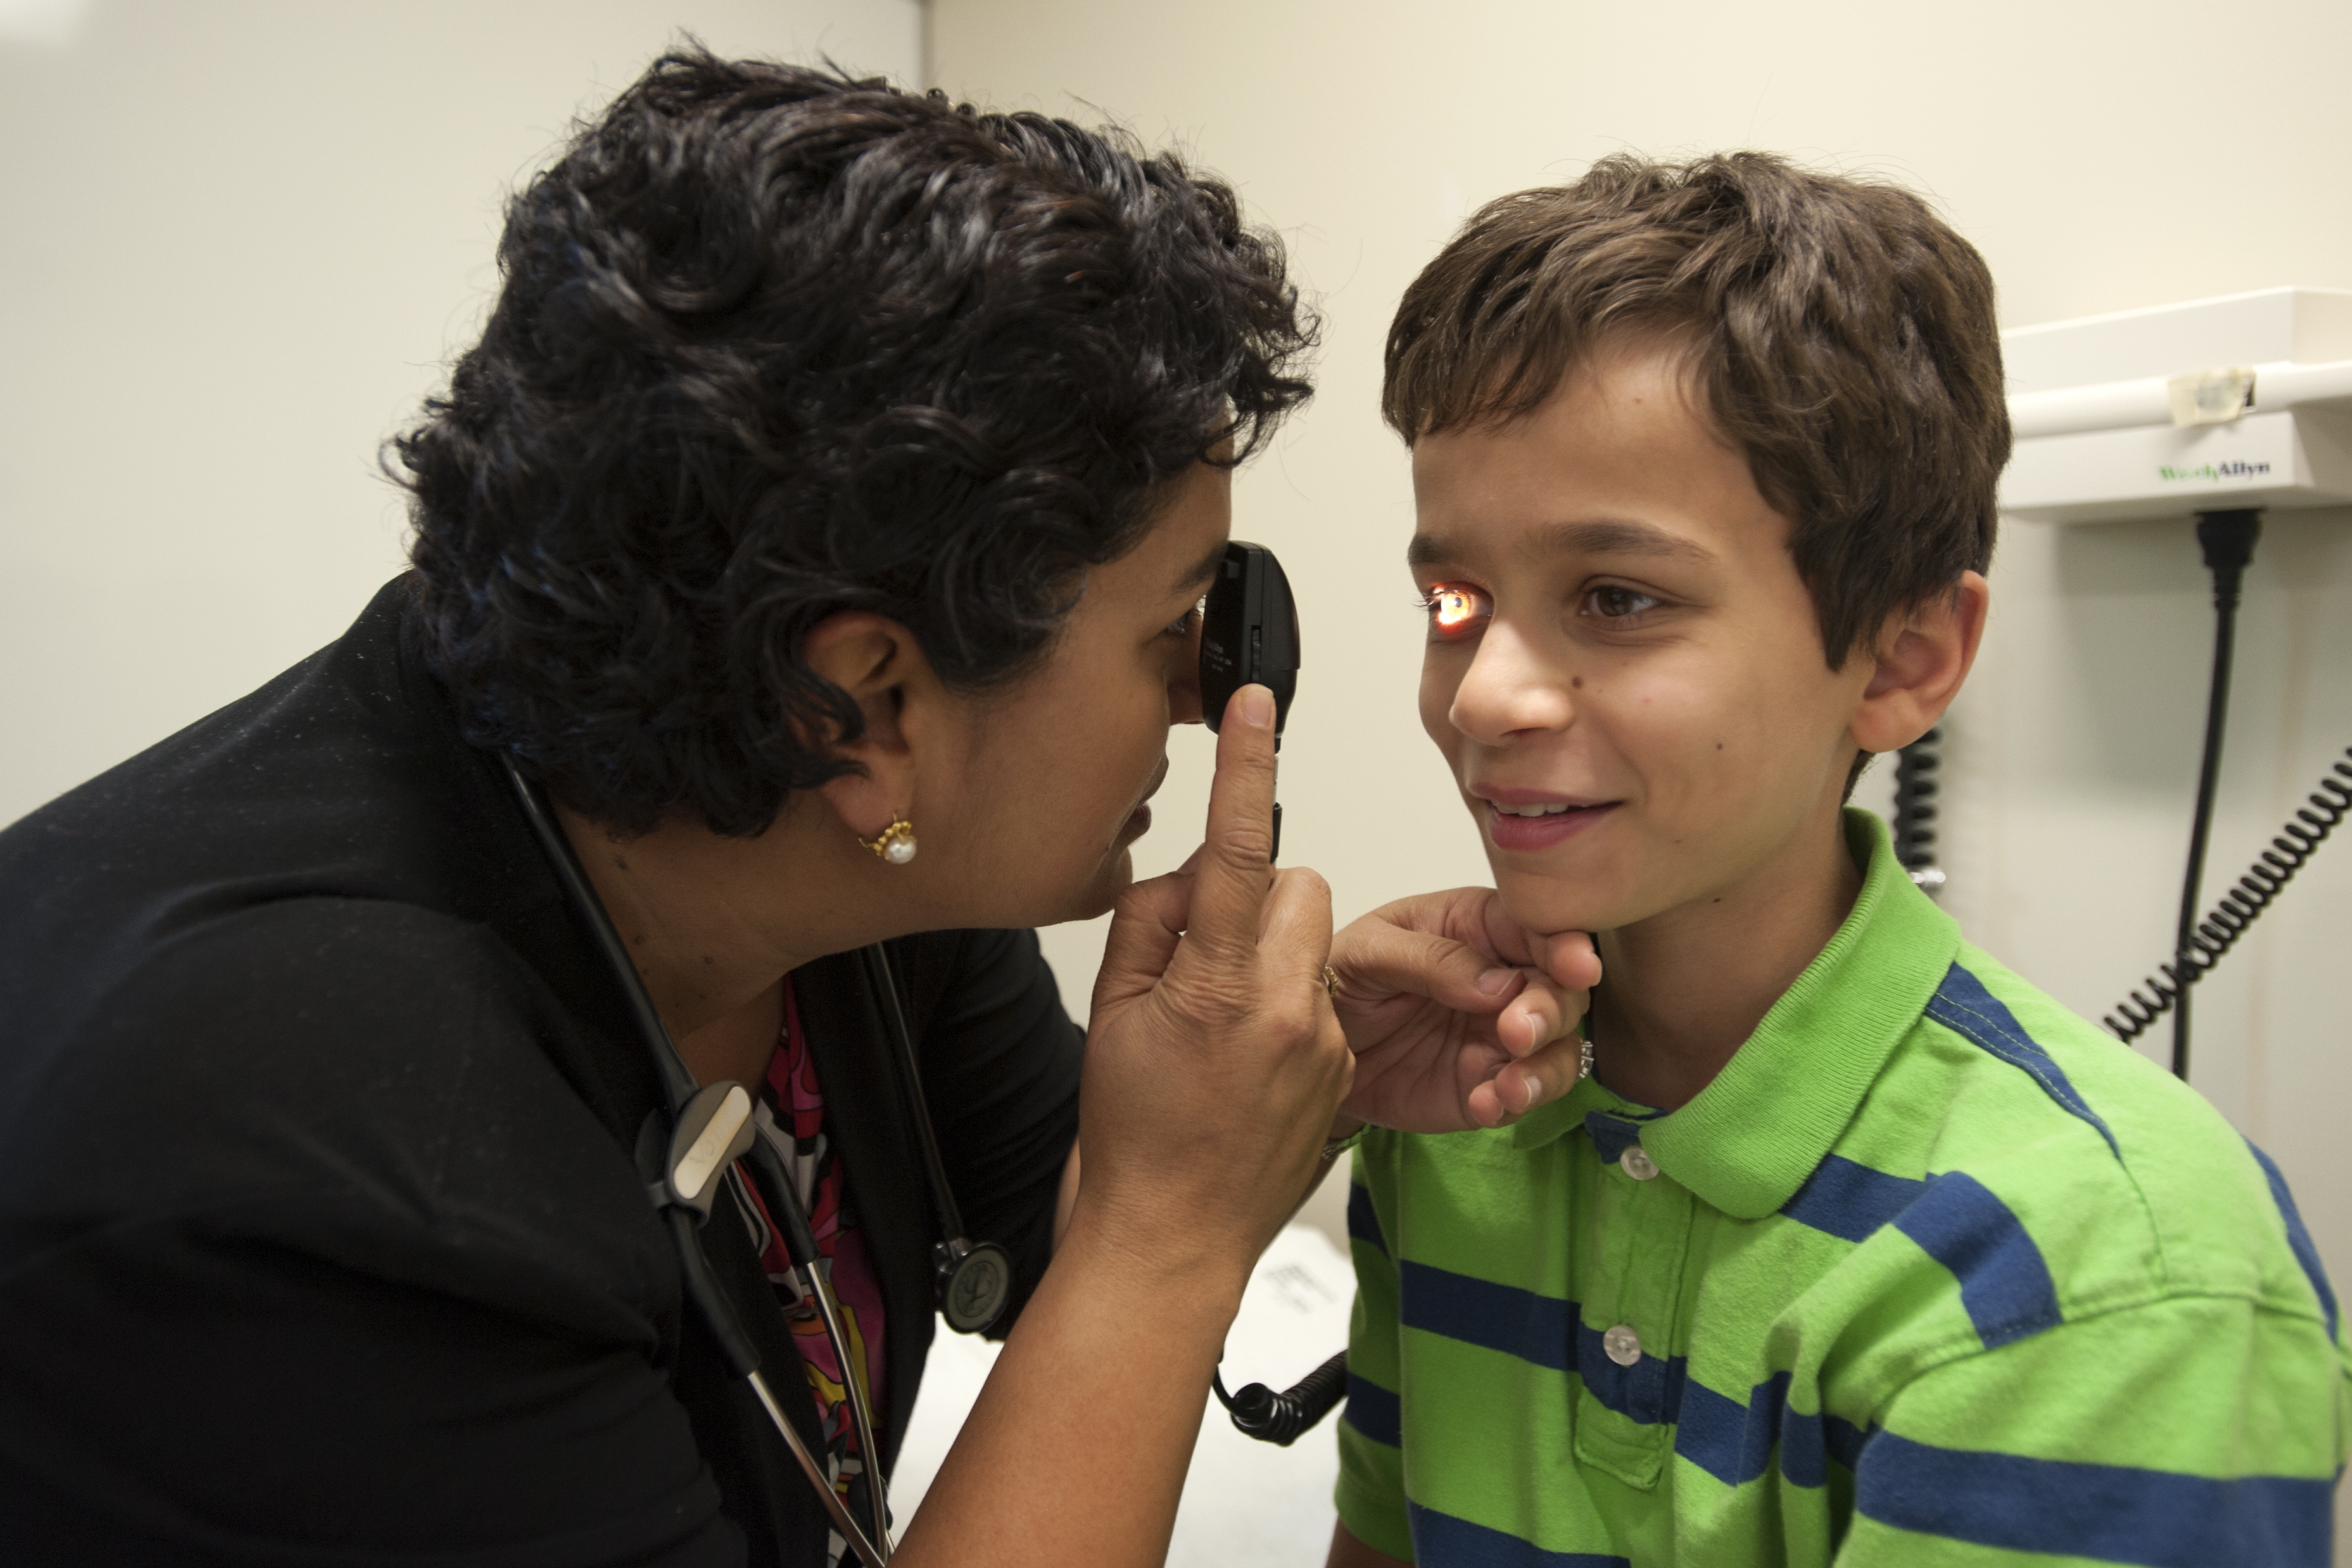 Dr. Vohra inspects a pediatric patient's eye